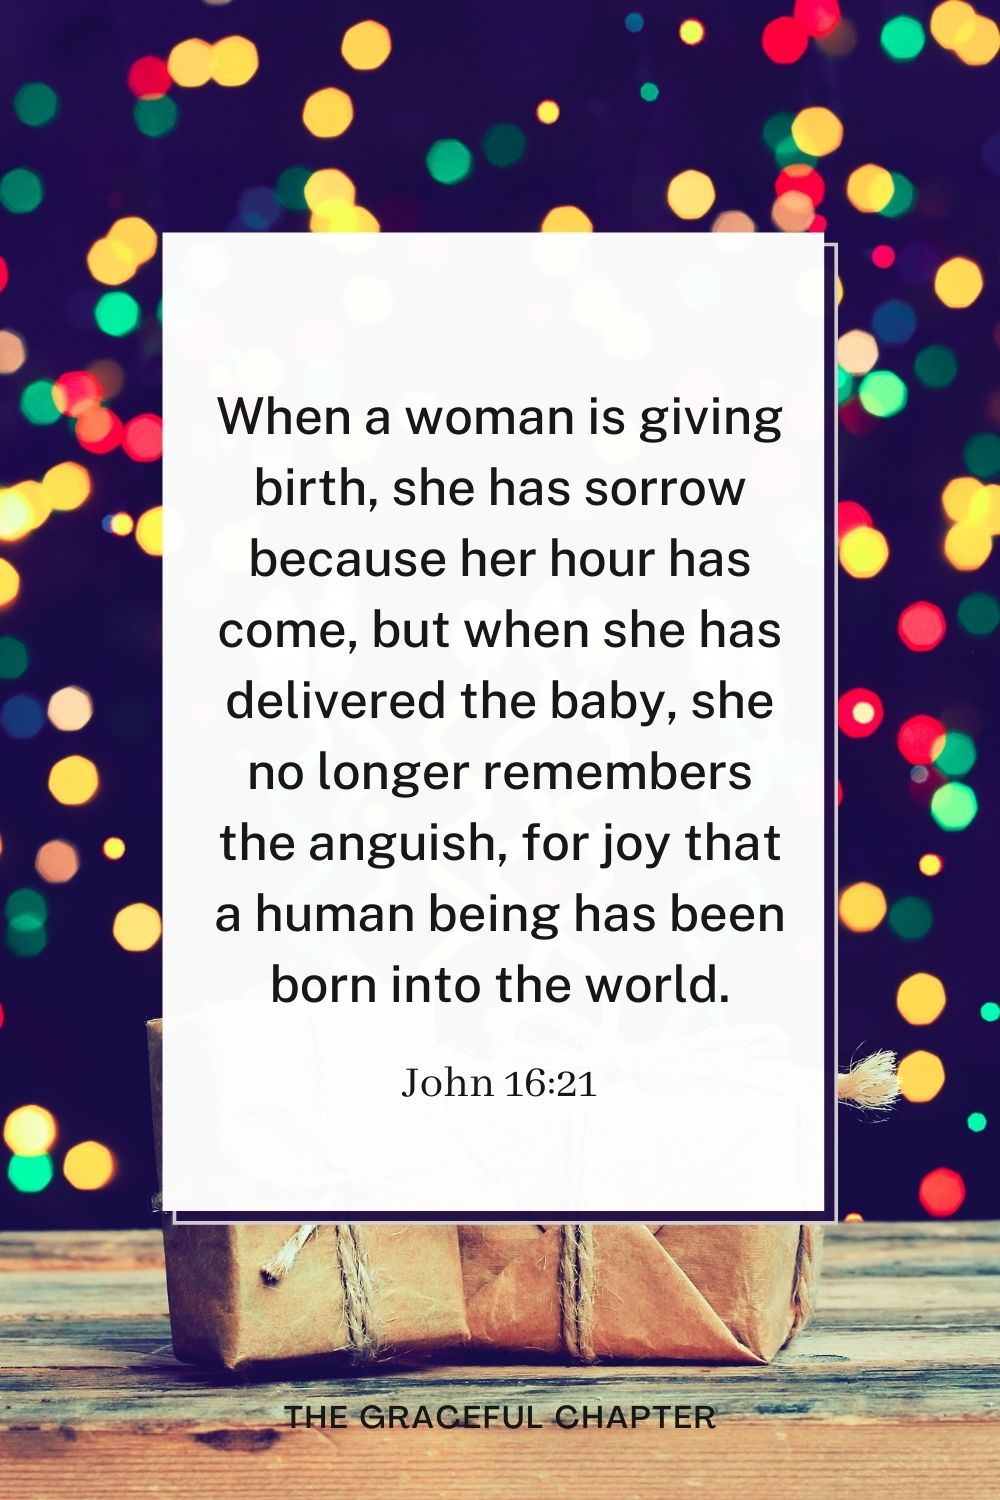 When a woman is giving birth, she has sorrow because her hour has come, but when she has delivered the baby, she no longer remembers the anguish, for joy that a human being has been born into the world. John 16:21